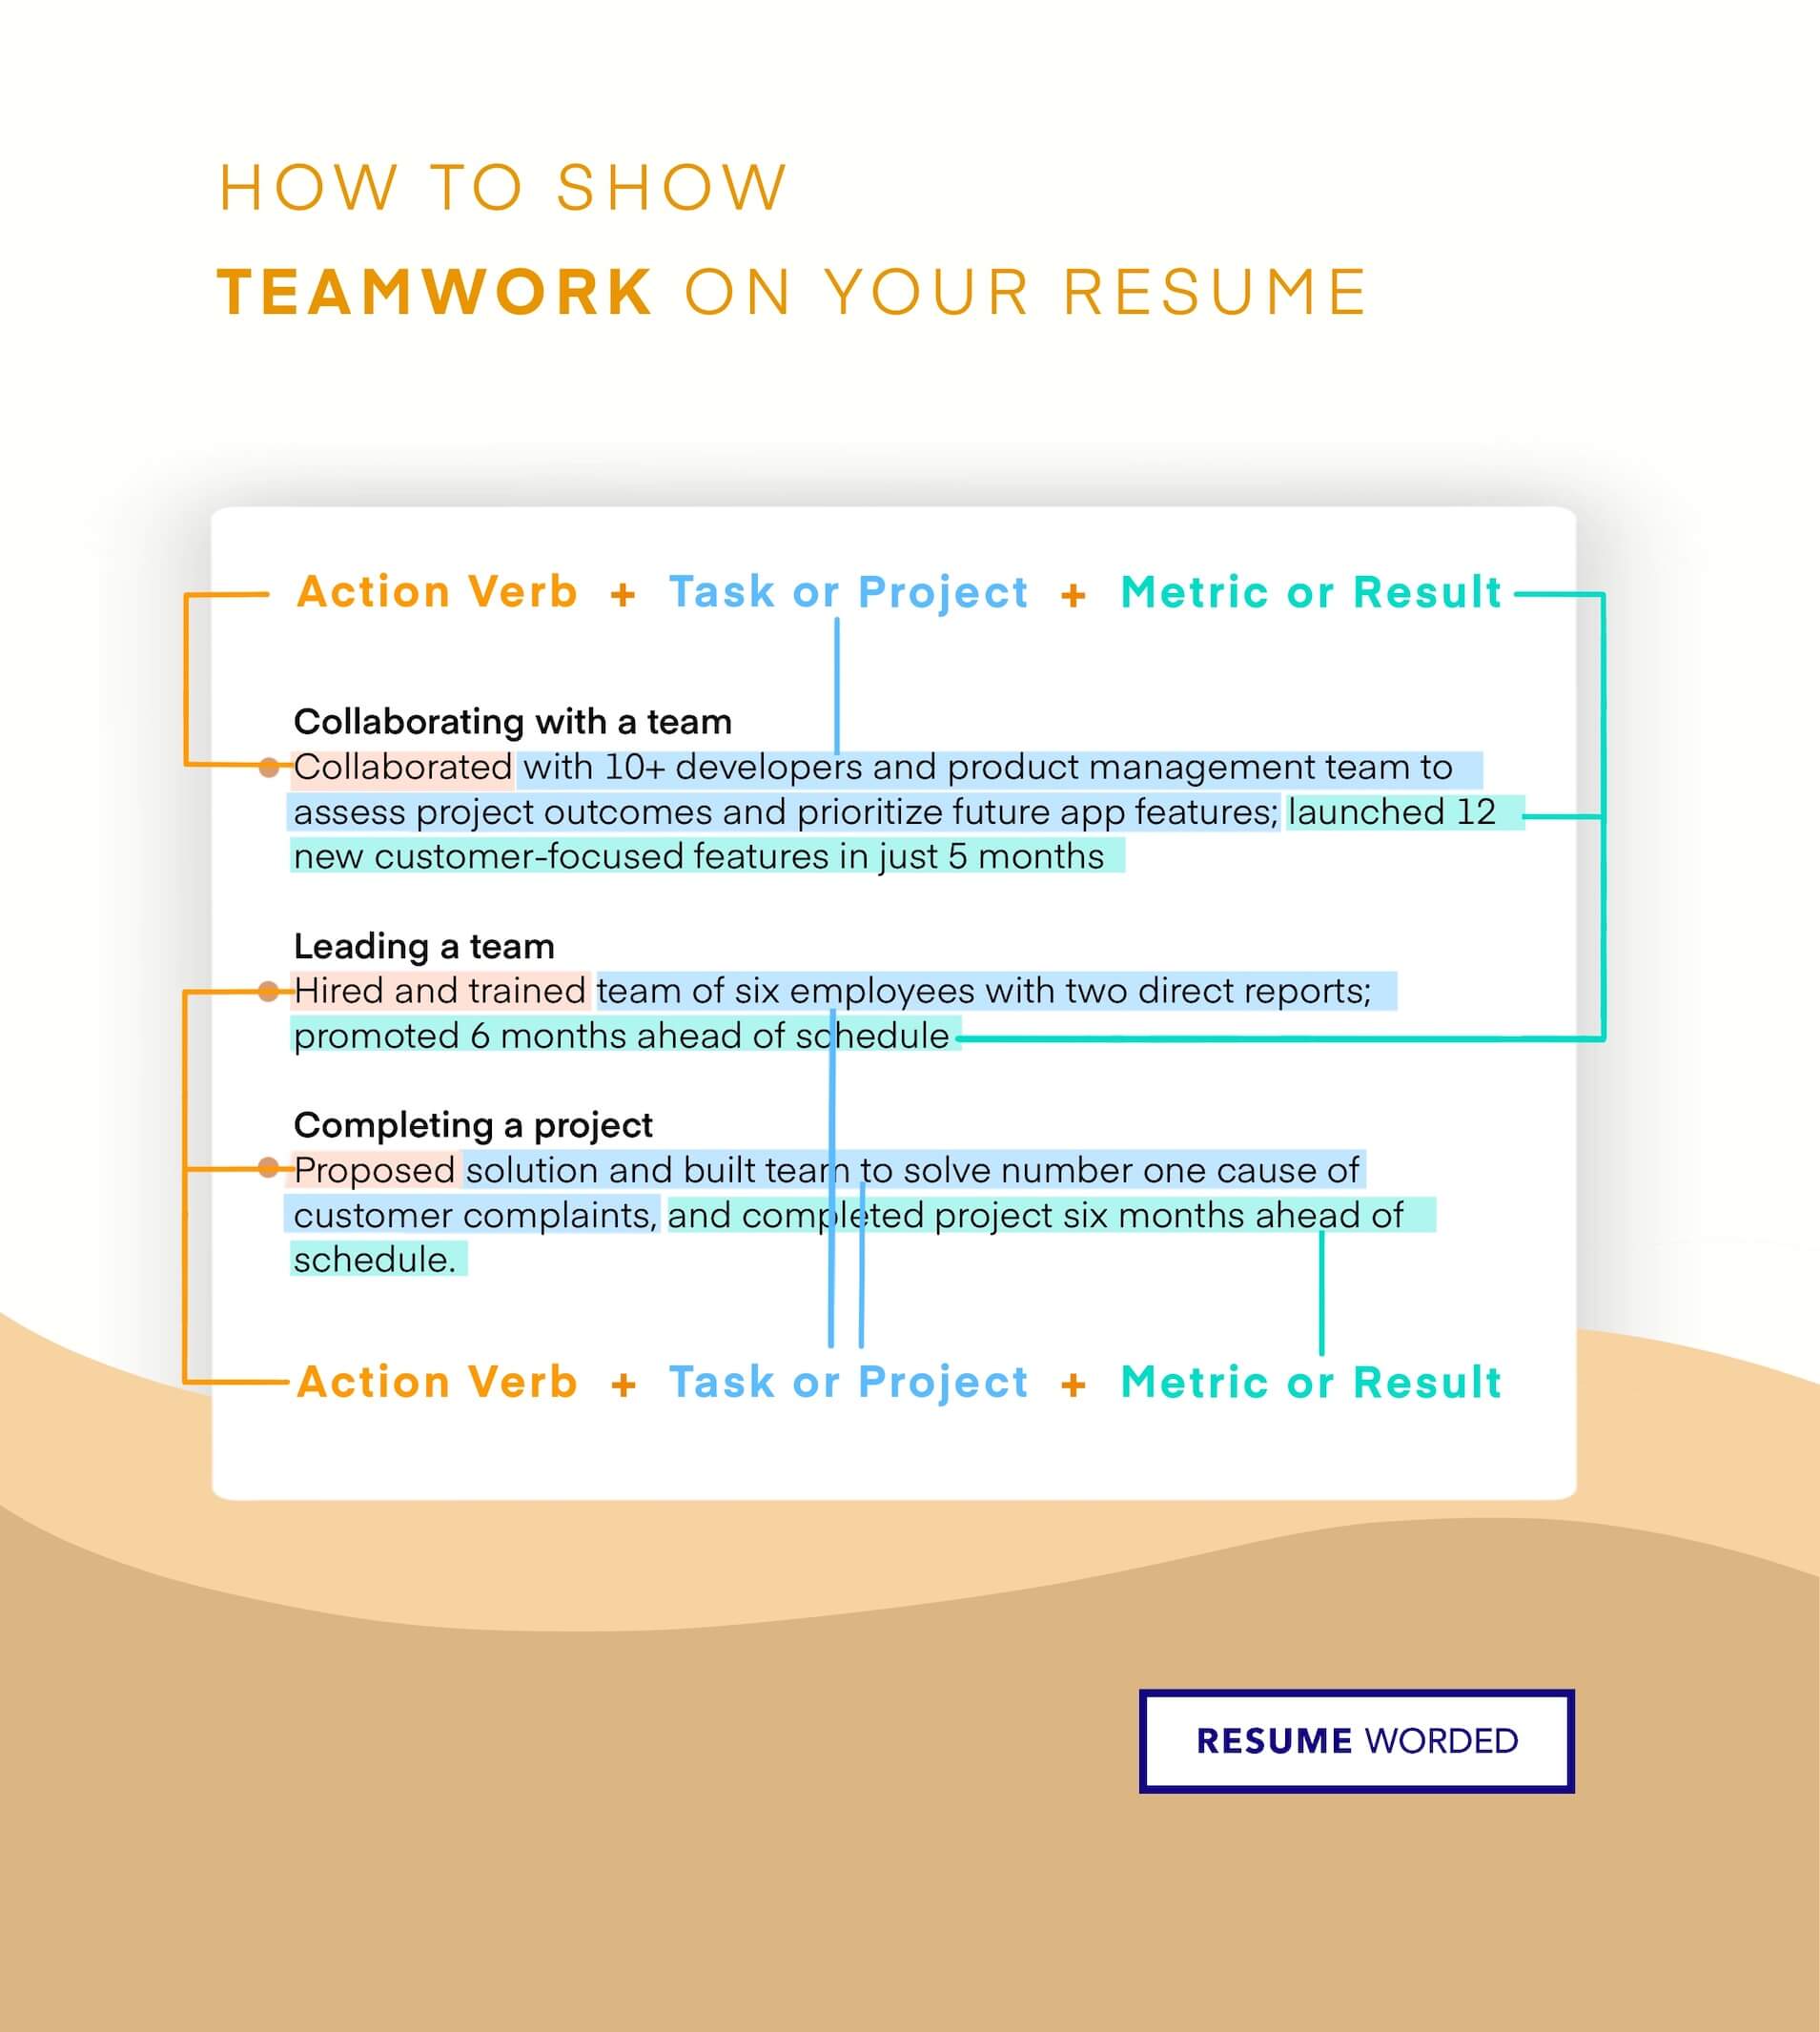 Showcase your ability to collaborate effectively within an organization - Design Director Resume